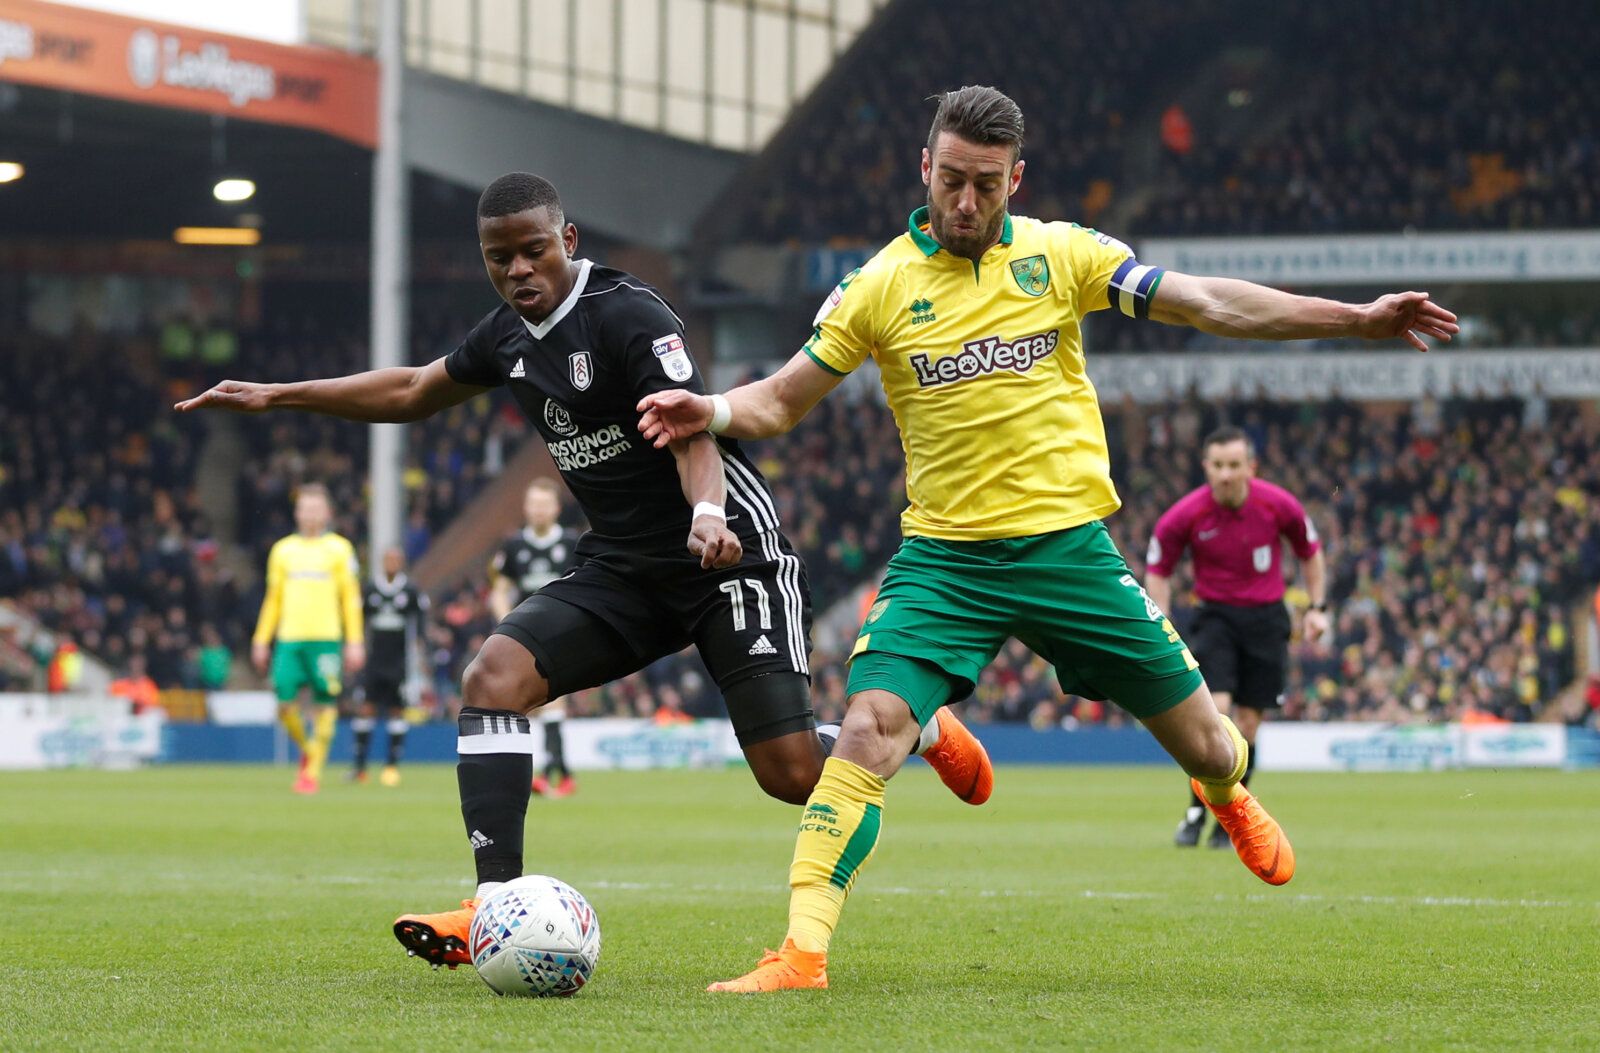 Soccer Football - Championship - Norwich City vs Fulham - Carrow Road, Norwich, Britain - March 30, 2018  Norwich City's Ivo Pinto in action with Fulham's Floyd Ayite   Action Images/Matthew Childs  EDITORIAL USE ONLY. No use with unauthorized audio, video, data, fixture lists, club/league logos or 